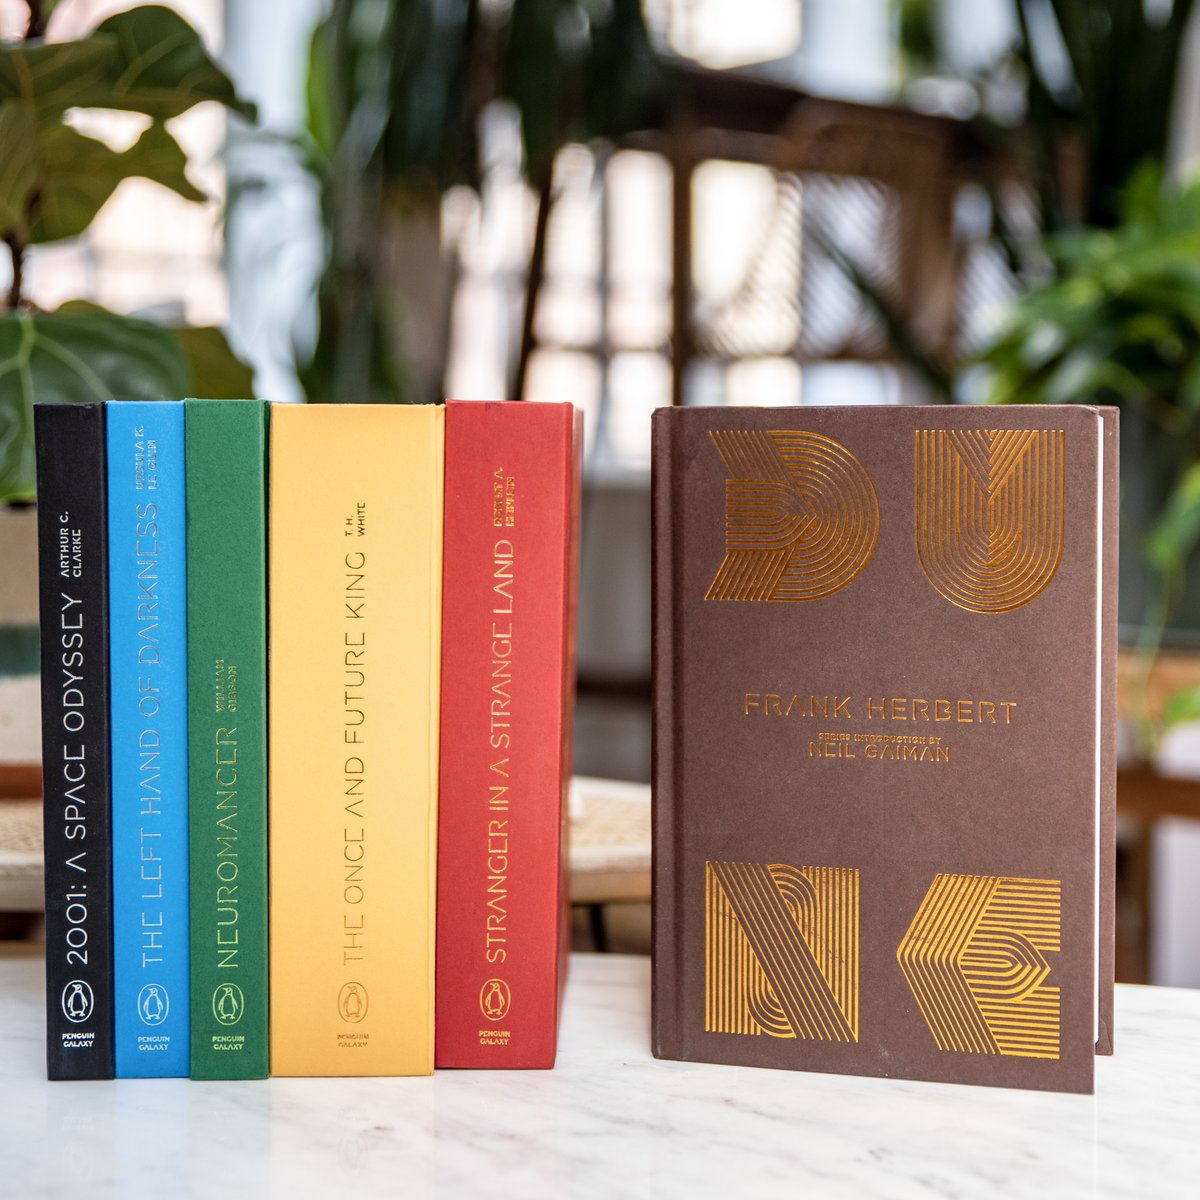 If you saw Dune Part II in theaters and are itching to immerse yourself in more science fiction stories, check out our Penguin Galaxy series for collectible hardcover editions of six of our greatest masterworks of science fiction and fantasy 👉 bit.ly/4cL6jkv